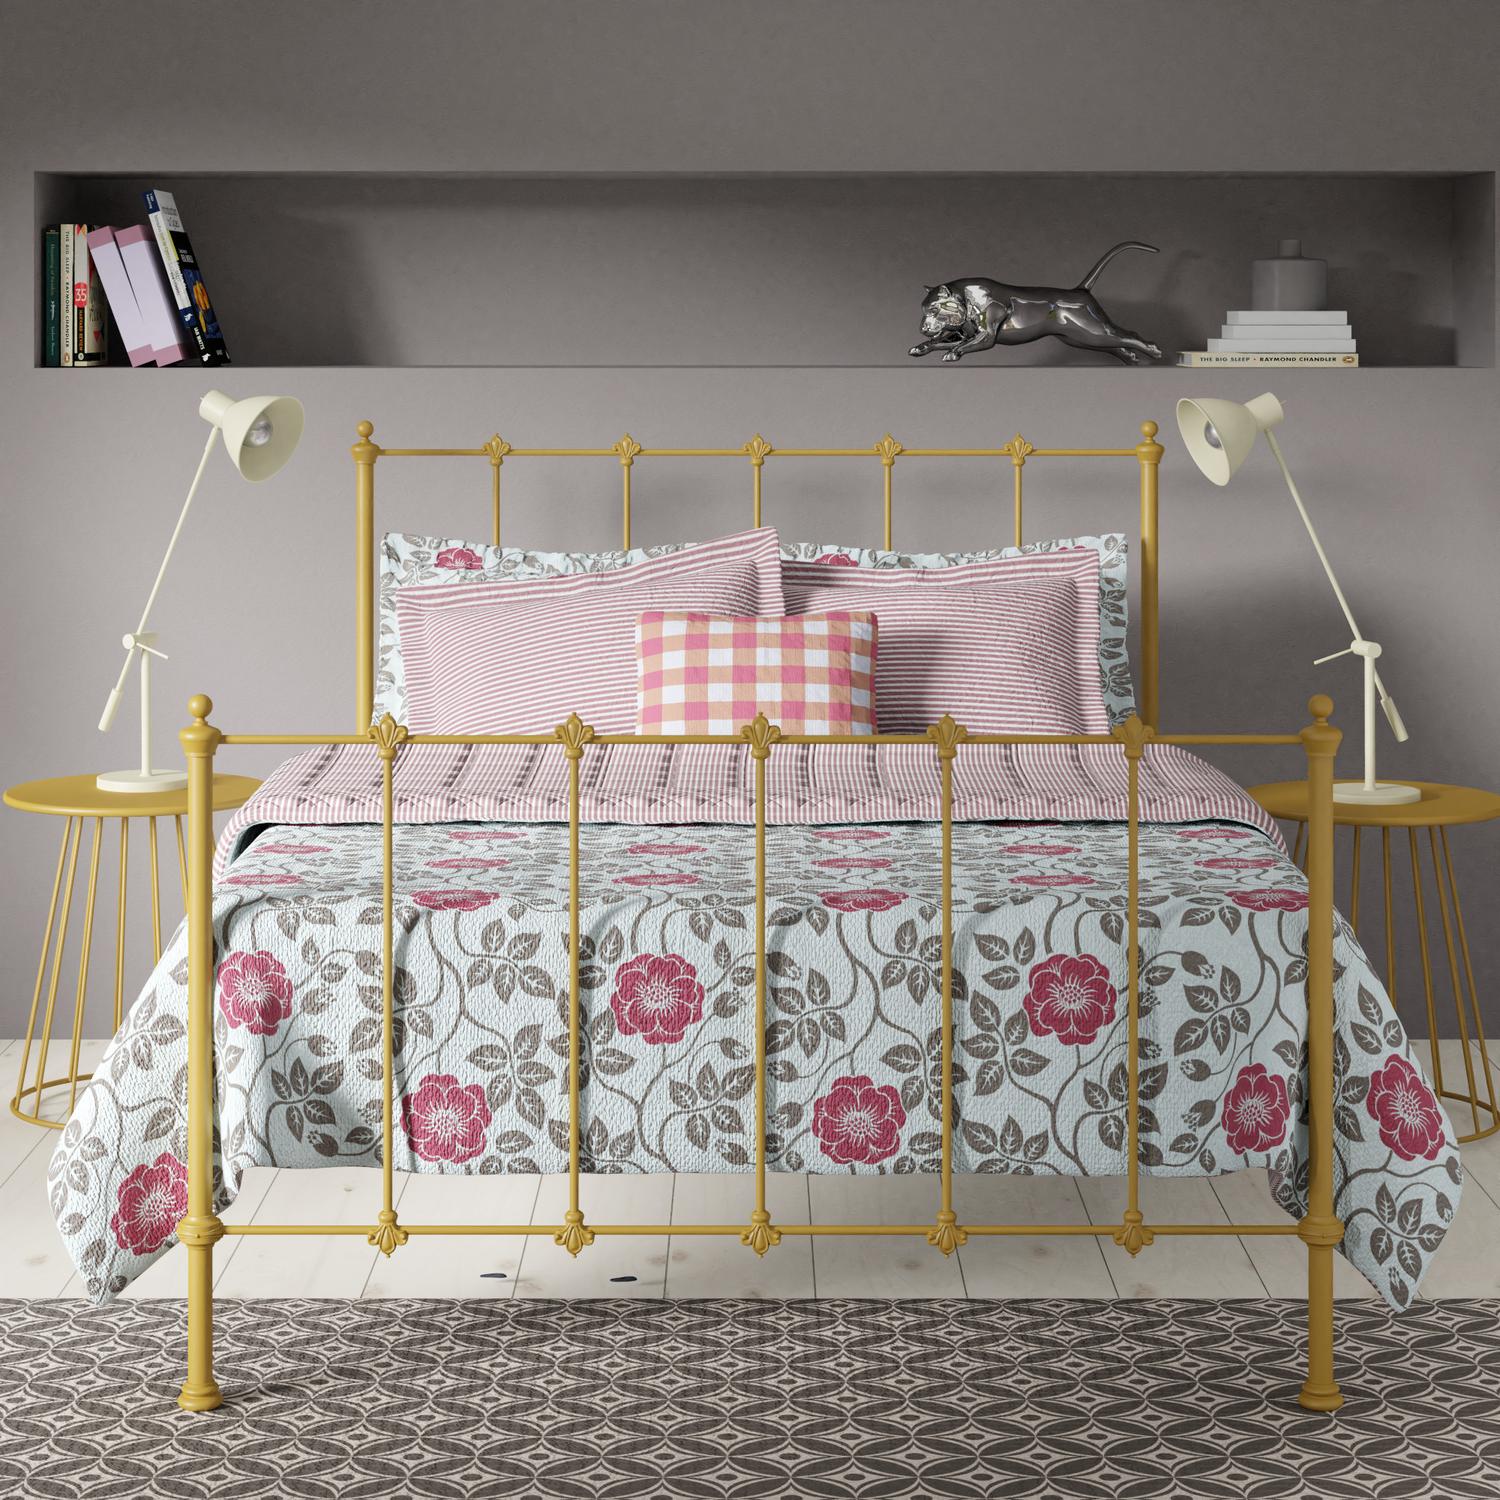 Paris iron bed - Image pink and yellow bedroom